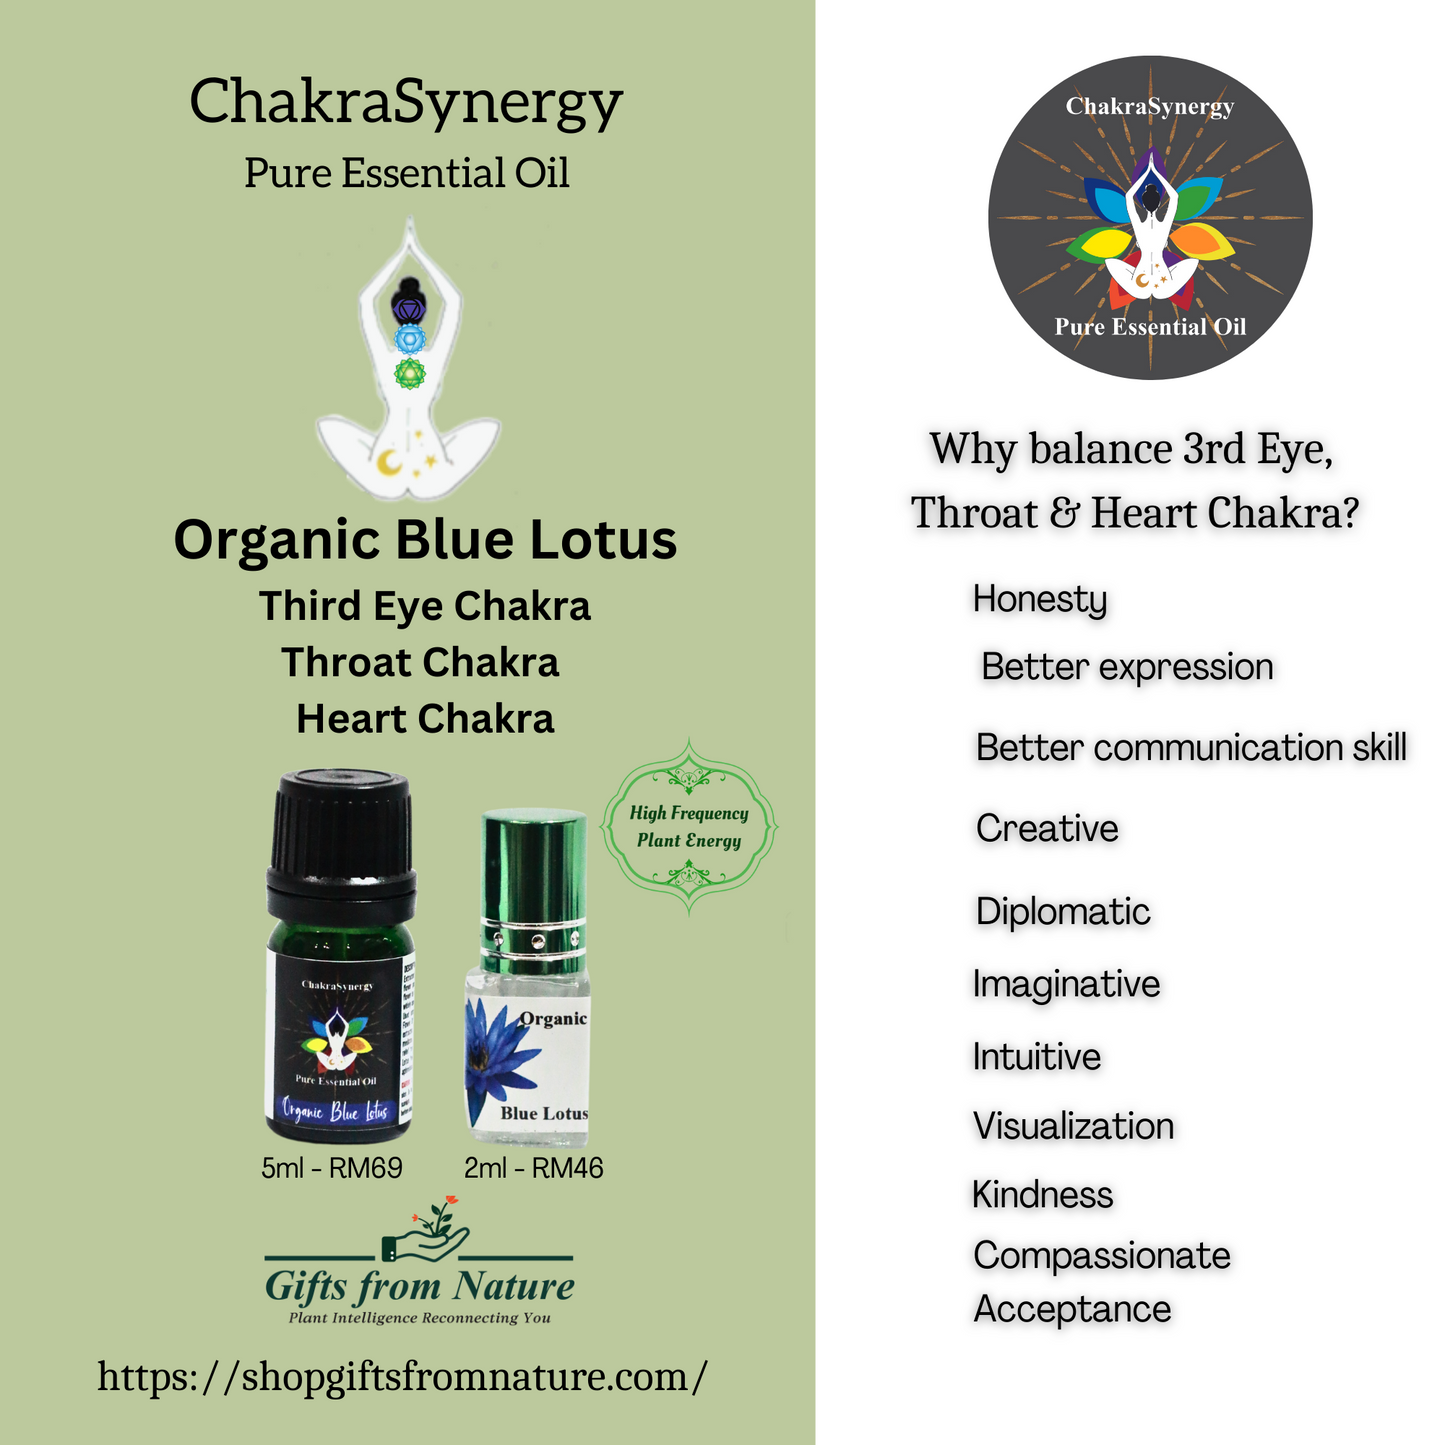 Bundle Of Divinity Chakra Synergy  High Frequency Pure Essential Oil (FREE GIFT INCLUDED)